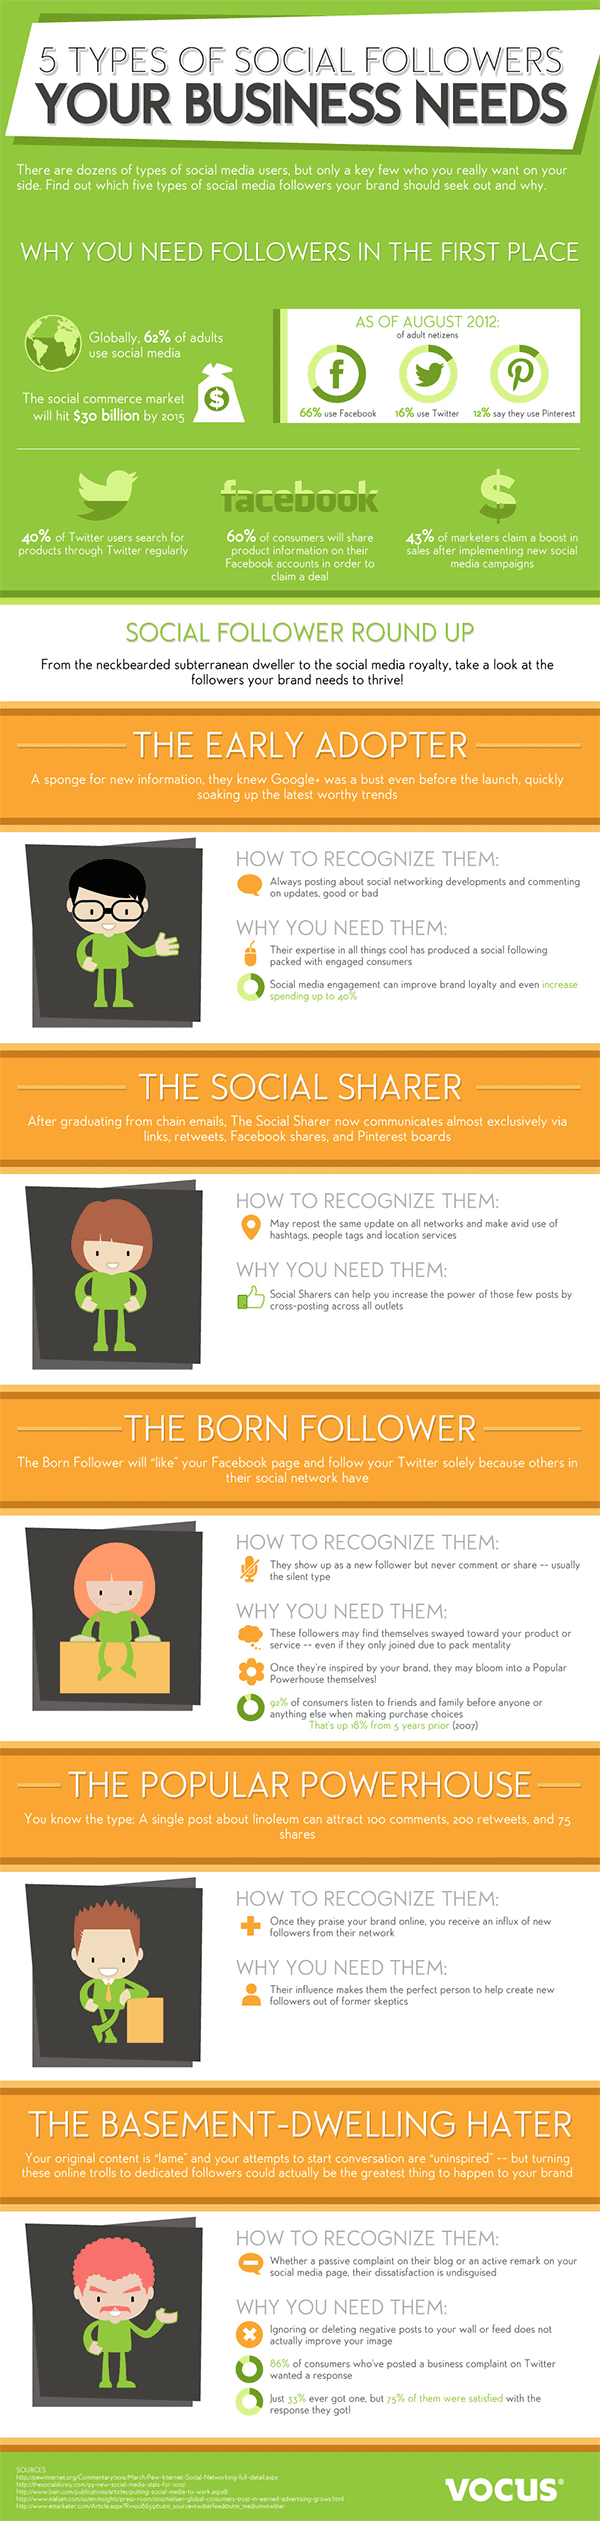 5-types-of-social-media-followers-your-business-needs-to-succeed